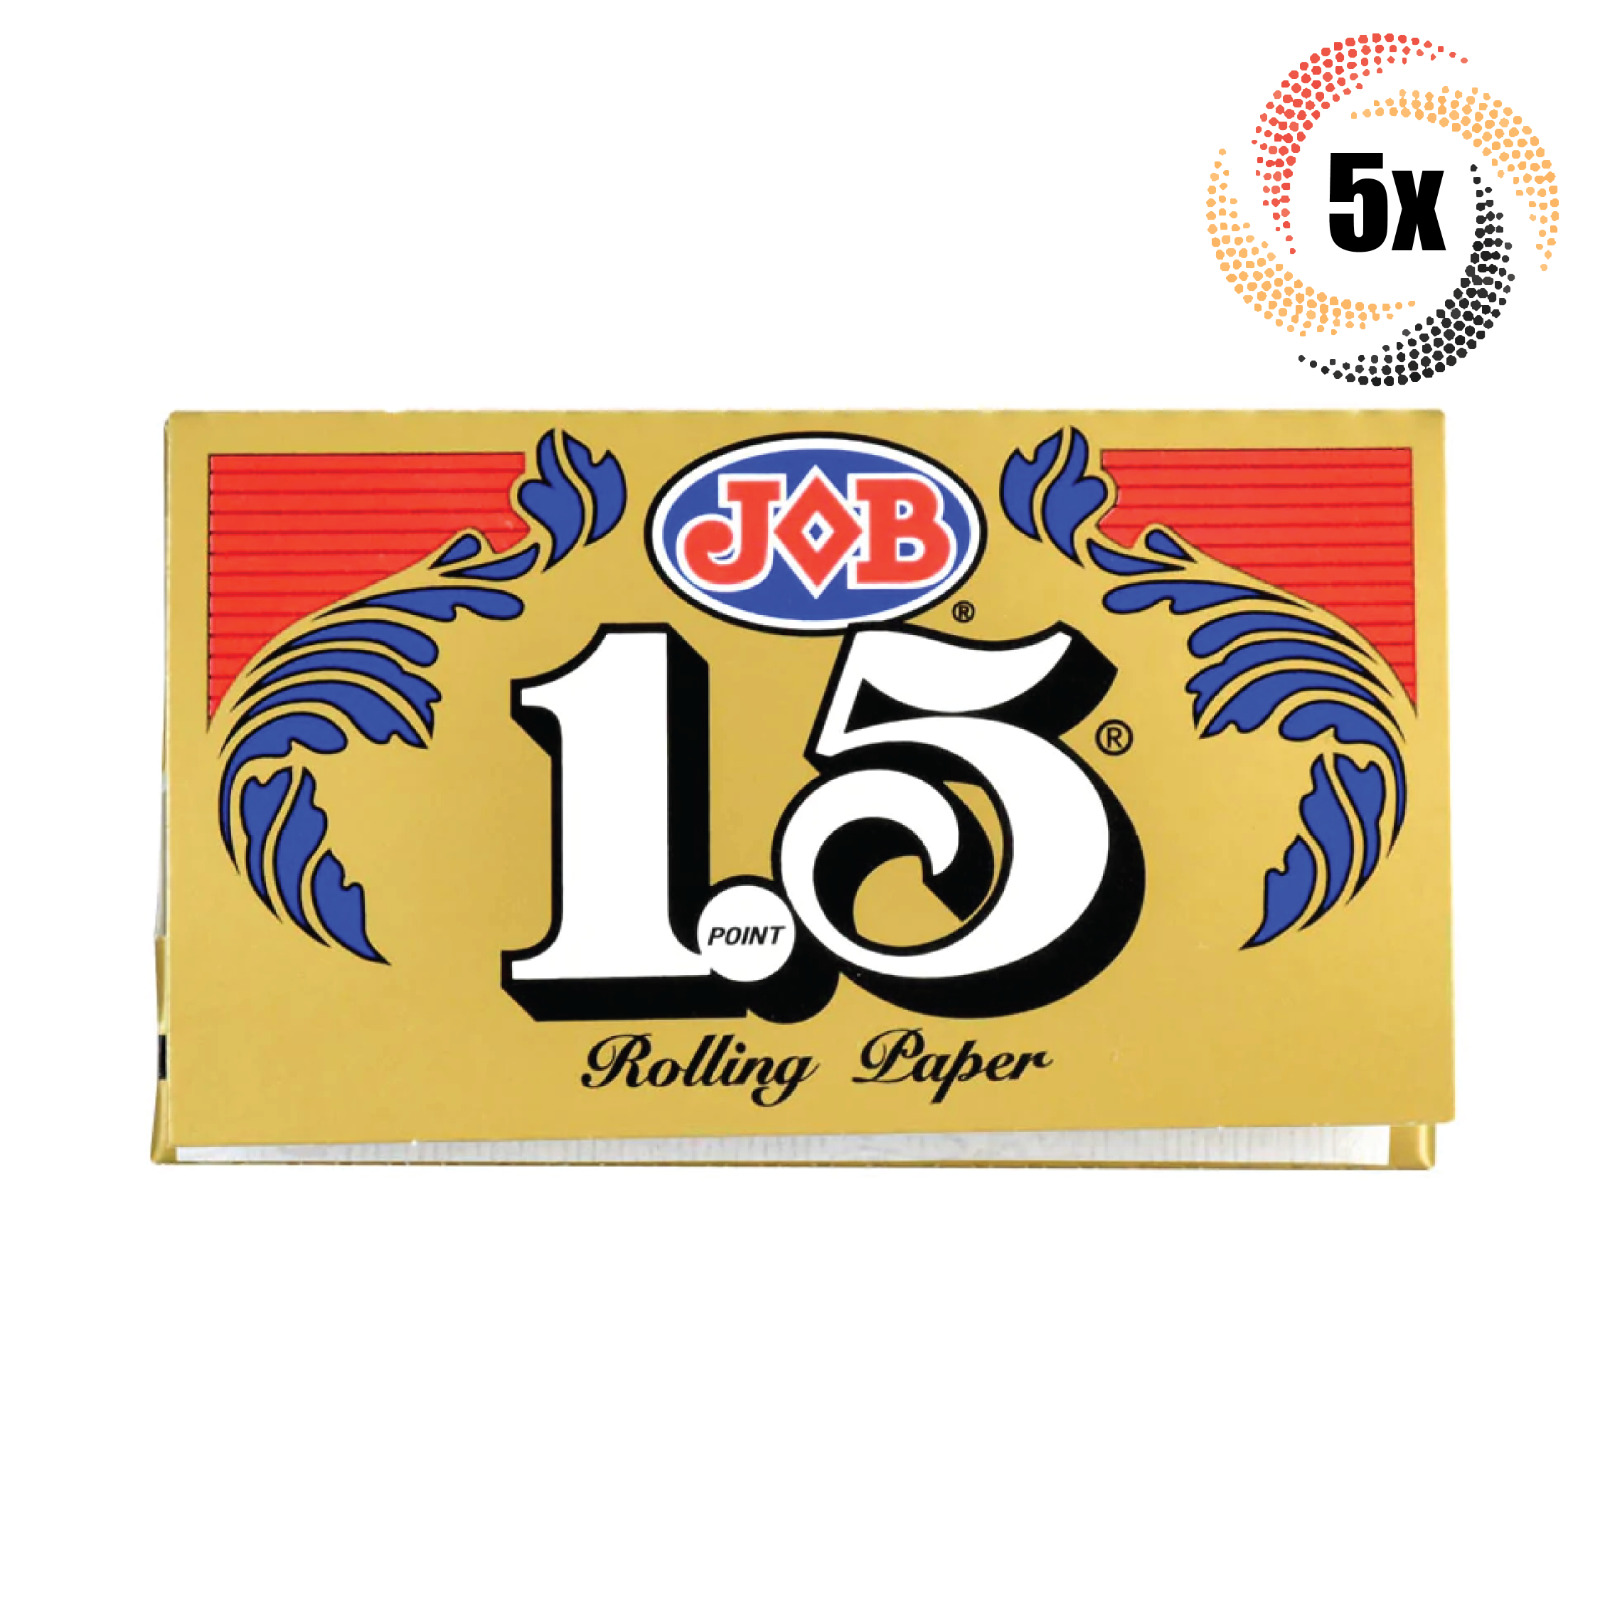 5x Packs Job Gold 1.5 | 24 Papers Per Pack | + 2 Free Rolling Tubes